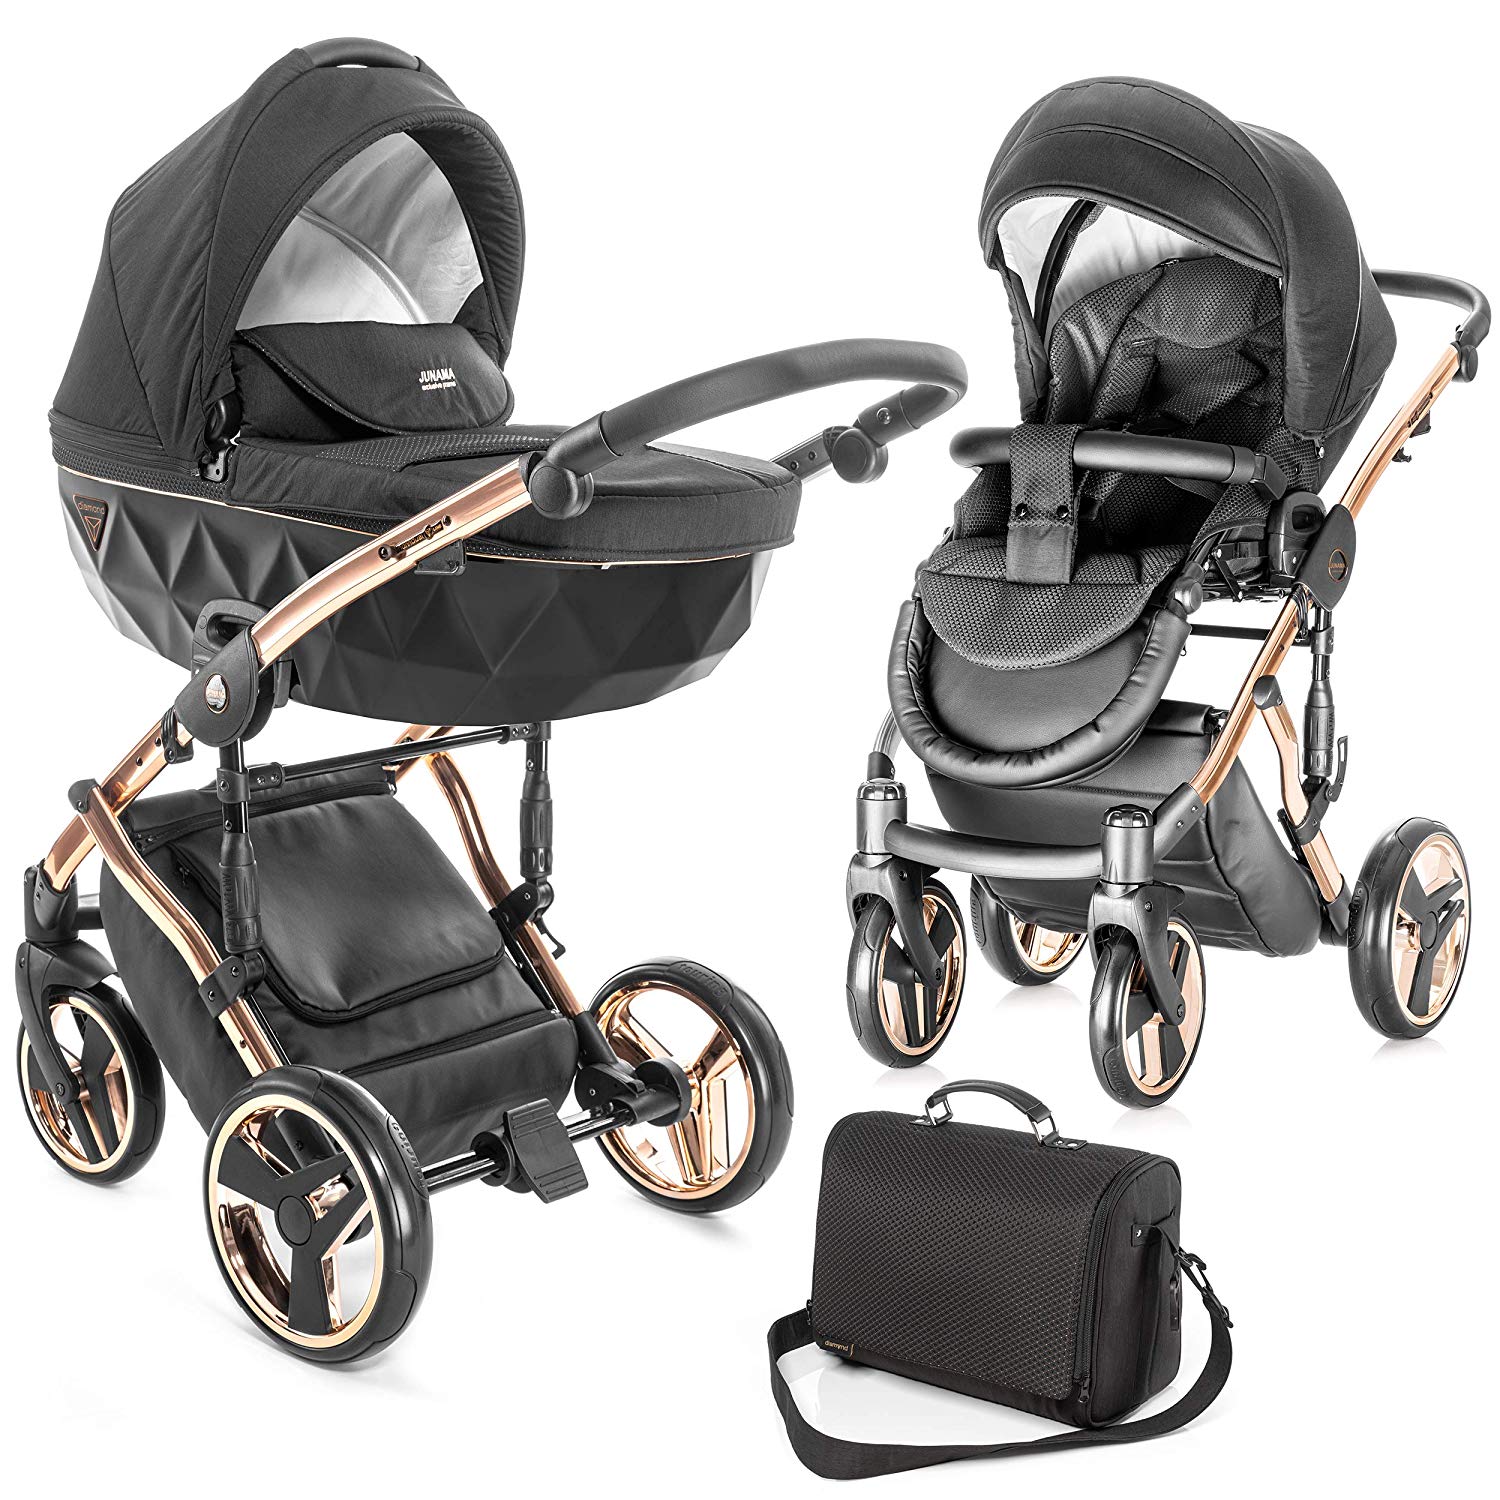 Junama Diamond 2-in-1 Combination Pram Set with Baby Carrycot and Sports Pushchair - Premium Pushchair with Changing Bag and Accessories - Black Rose Gold